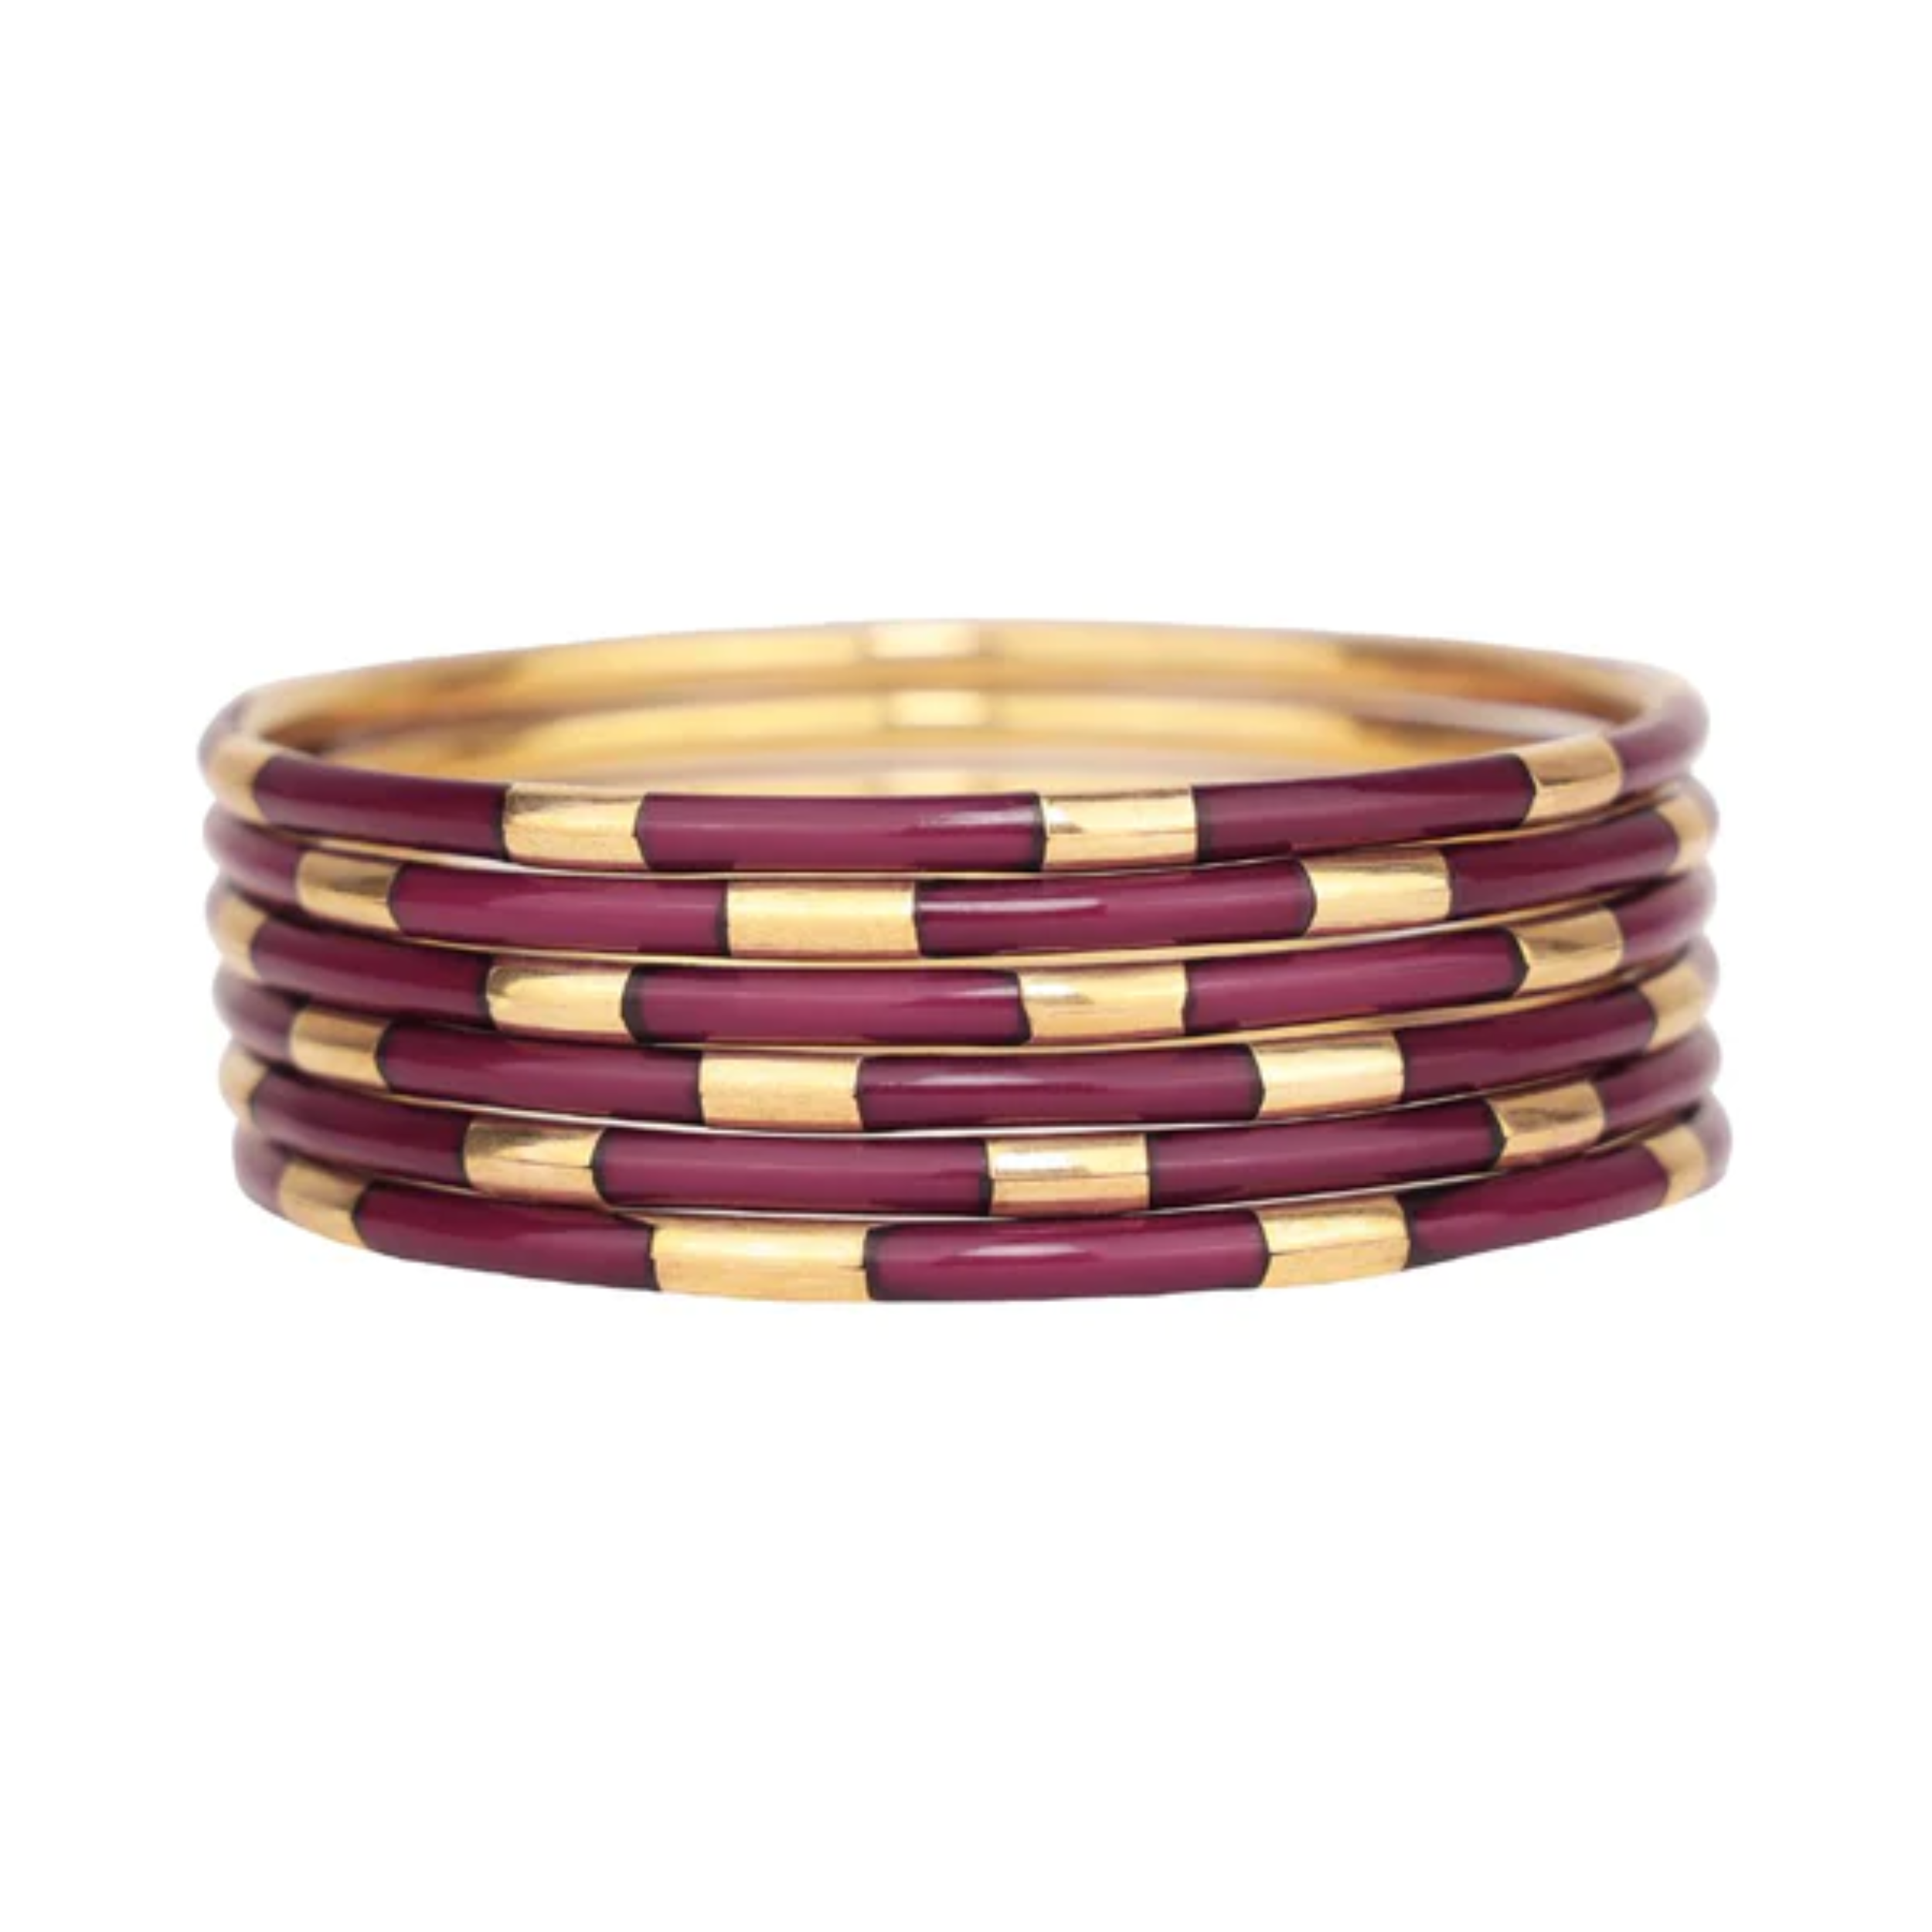 This set of Veda Bangles in Maroon by Budha Girl is pictured on a white background.